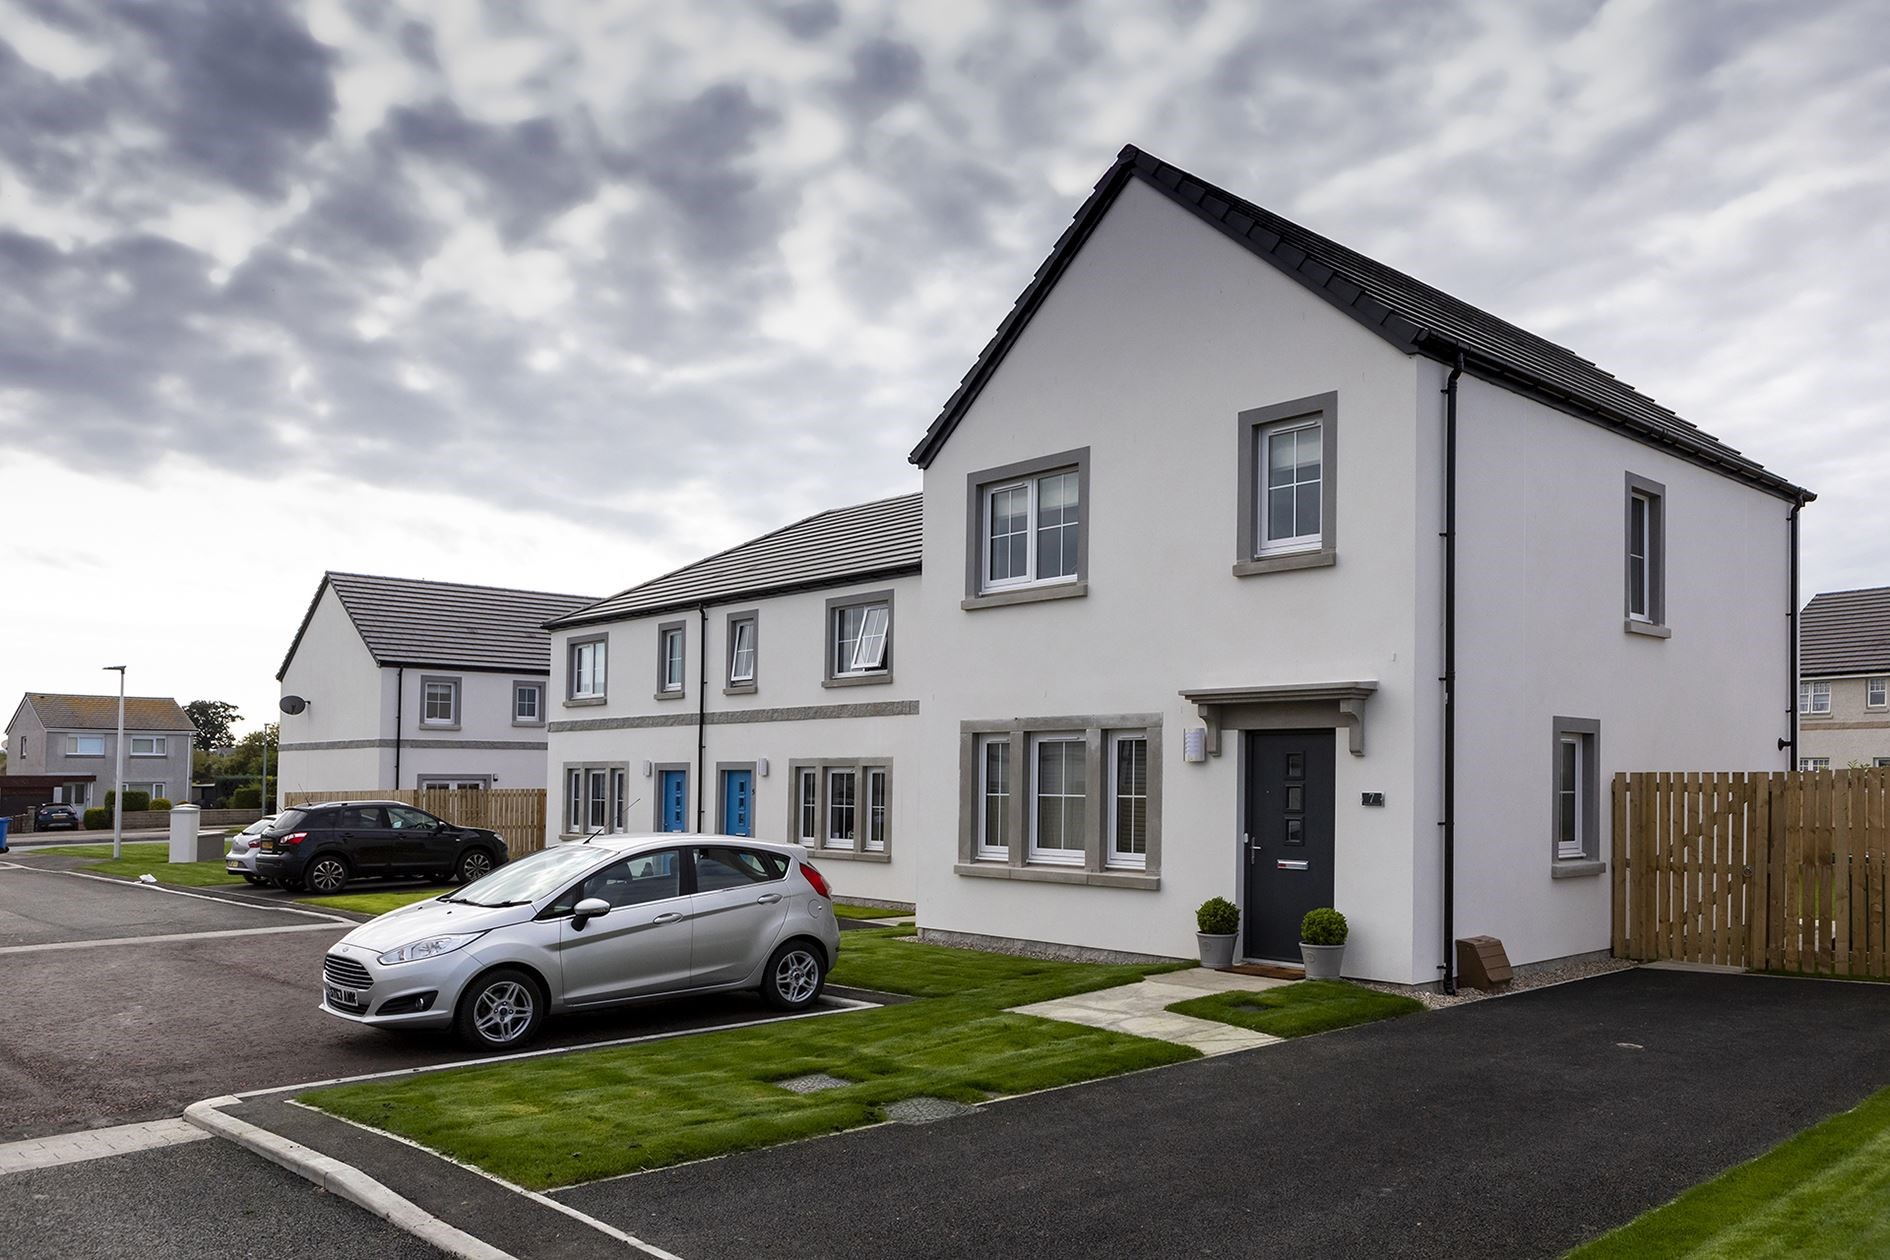 Pat Munro Homes houses within the Newfield North and Whitehills North developments in Alness